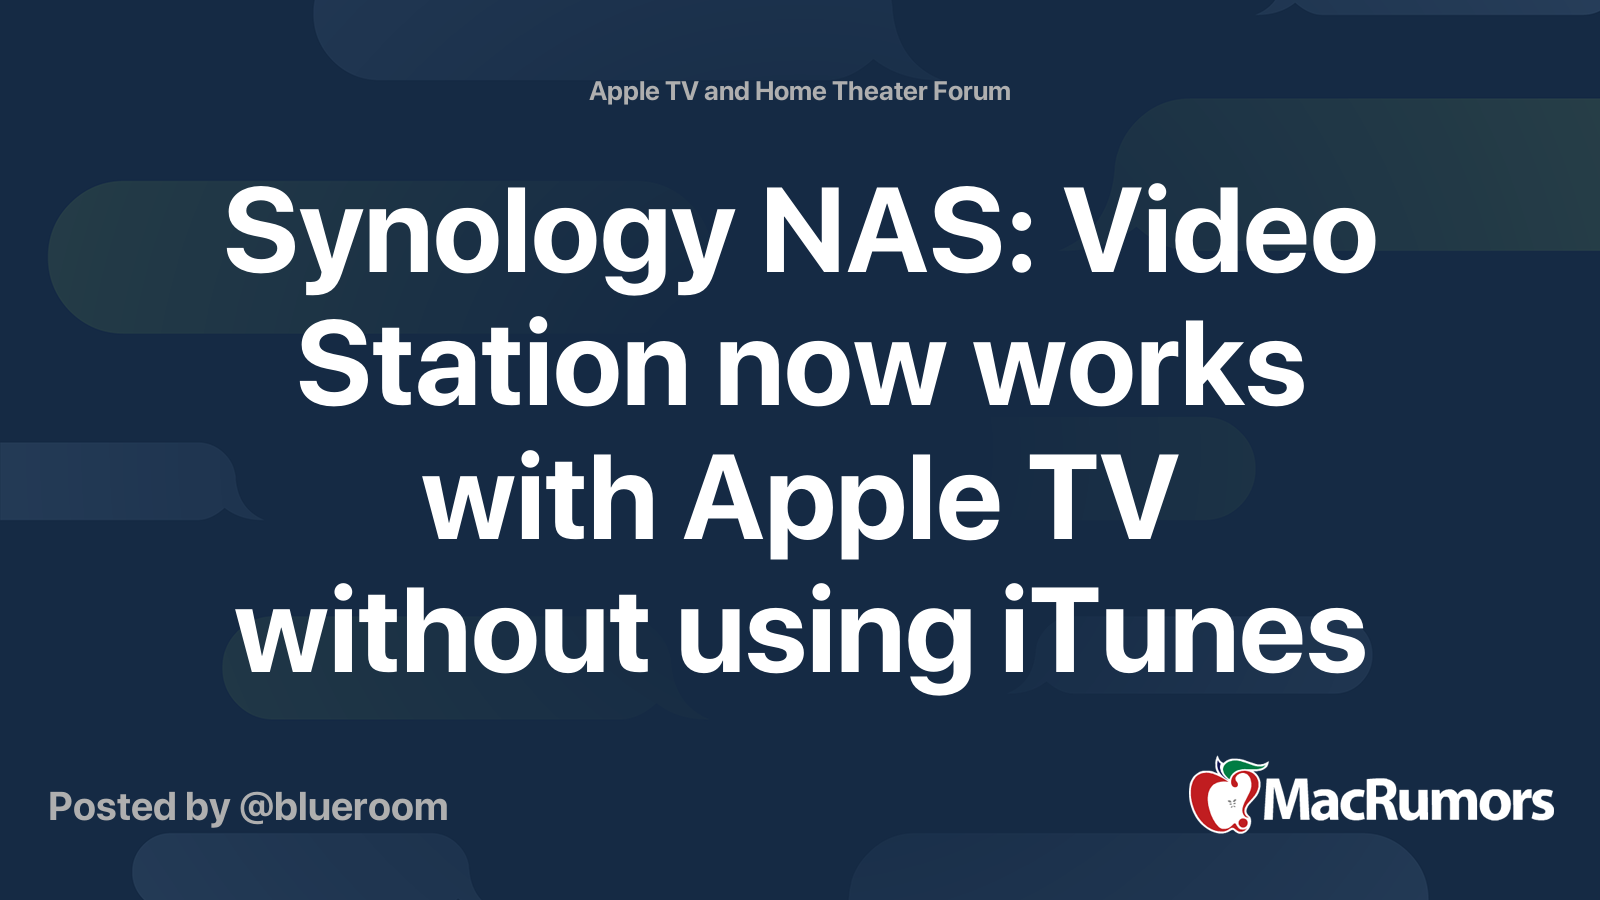 bibliotecario llave inglesa Deliberadamente Synology NAS: Video Station now works with Apple TV without using iTunes |  MacRumors Forums